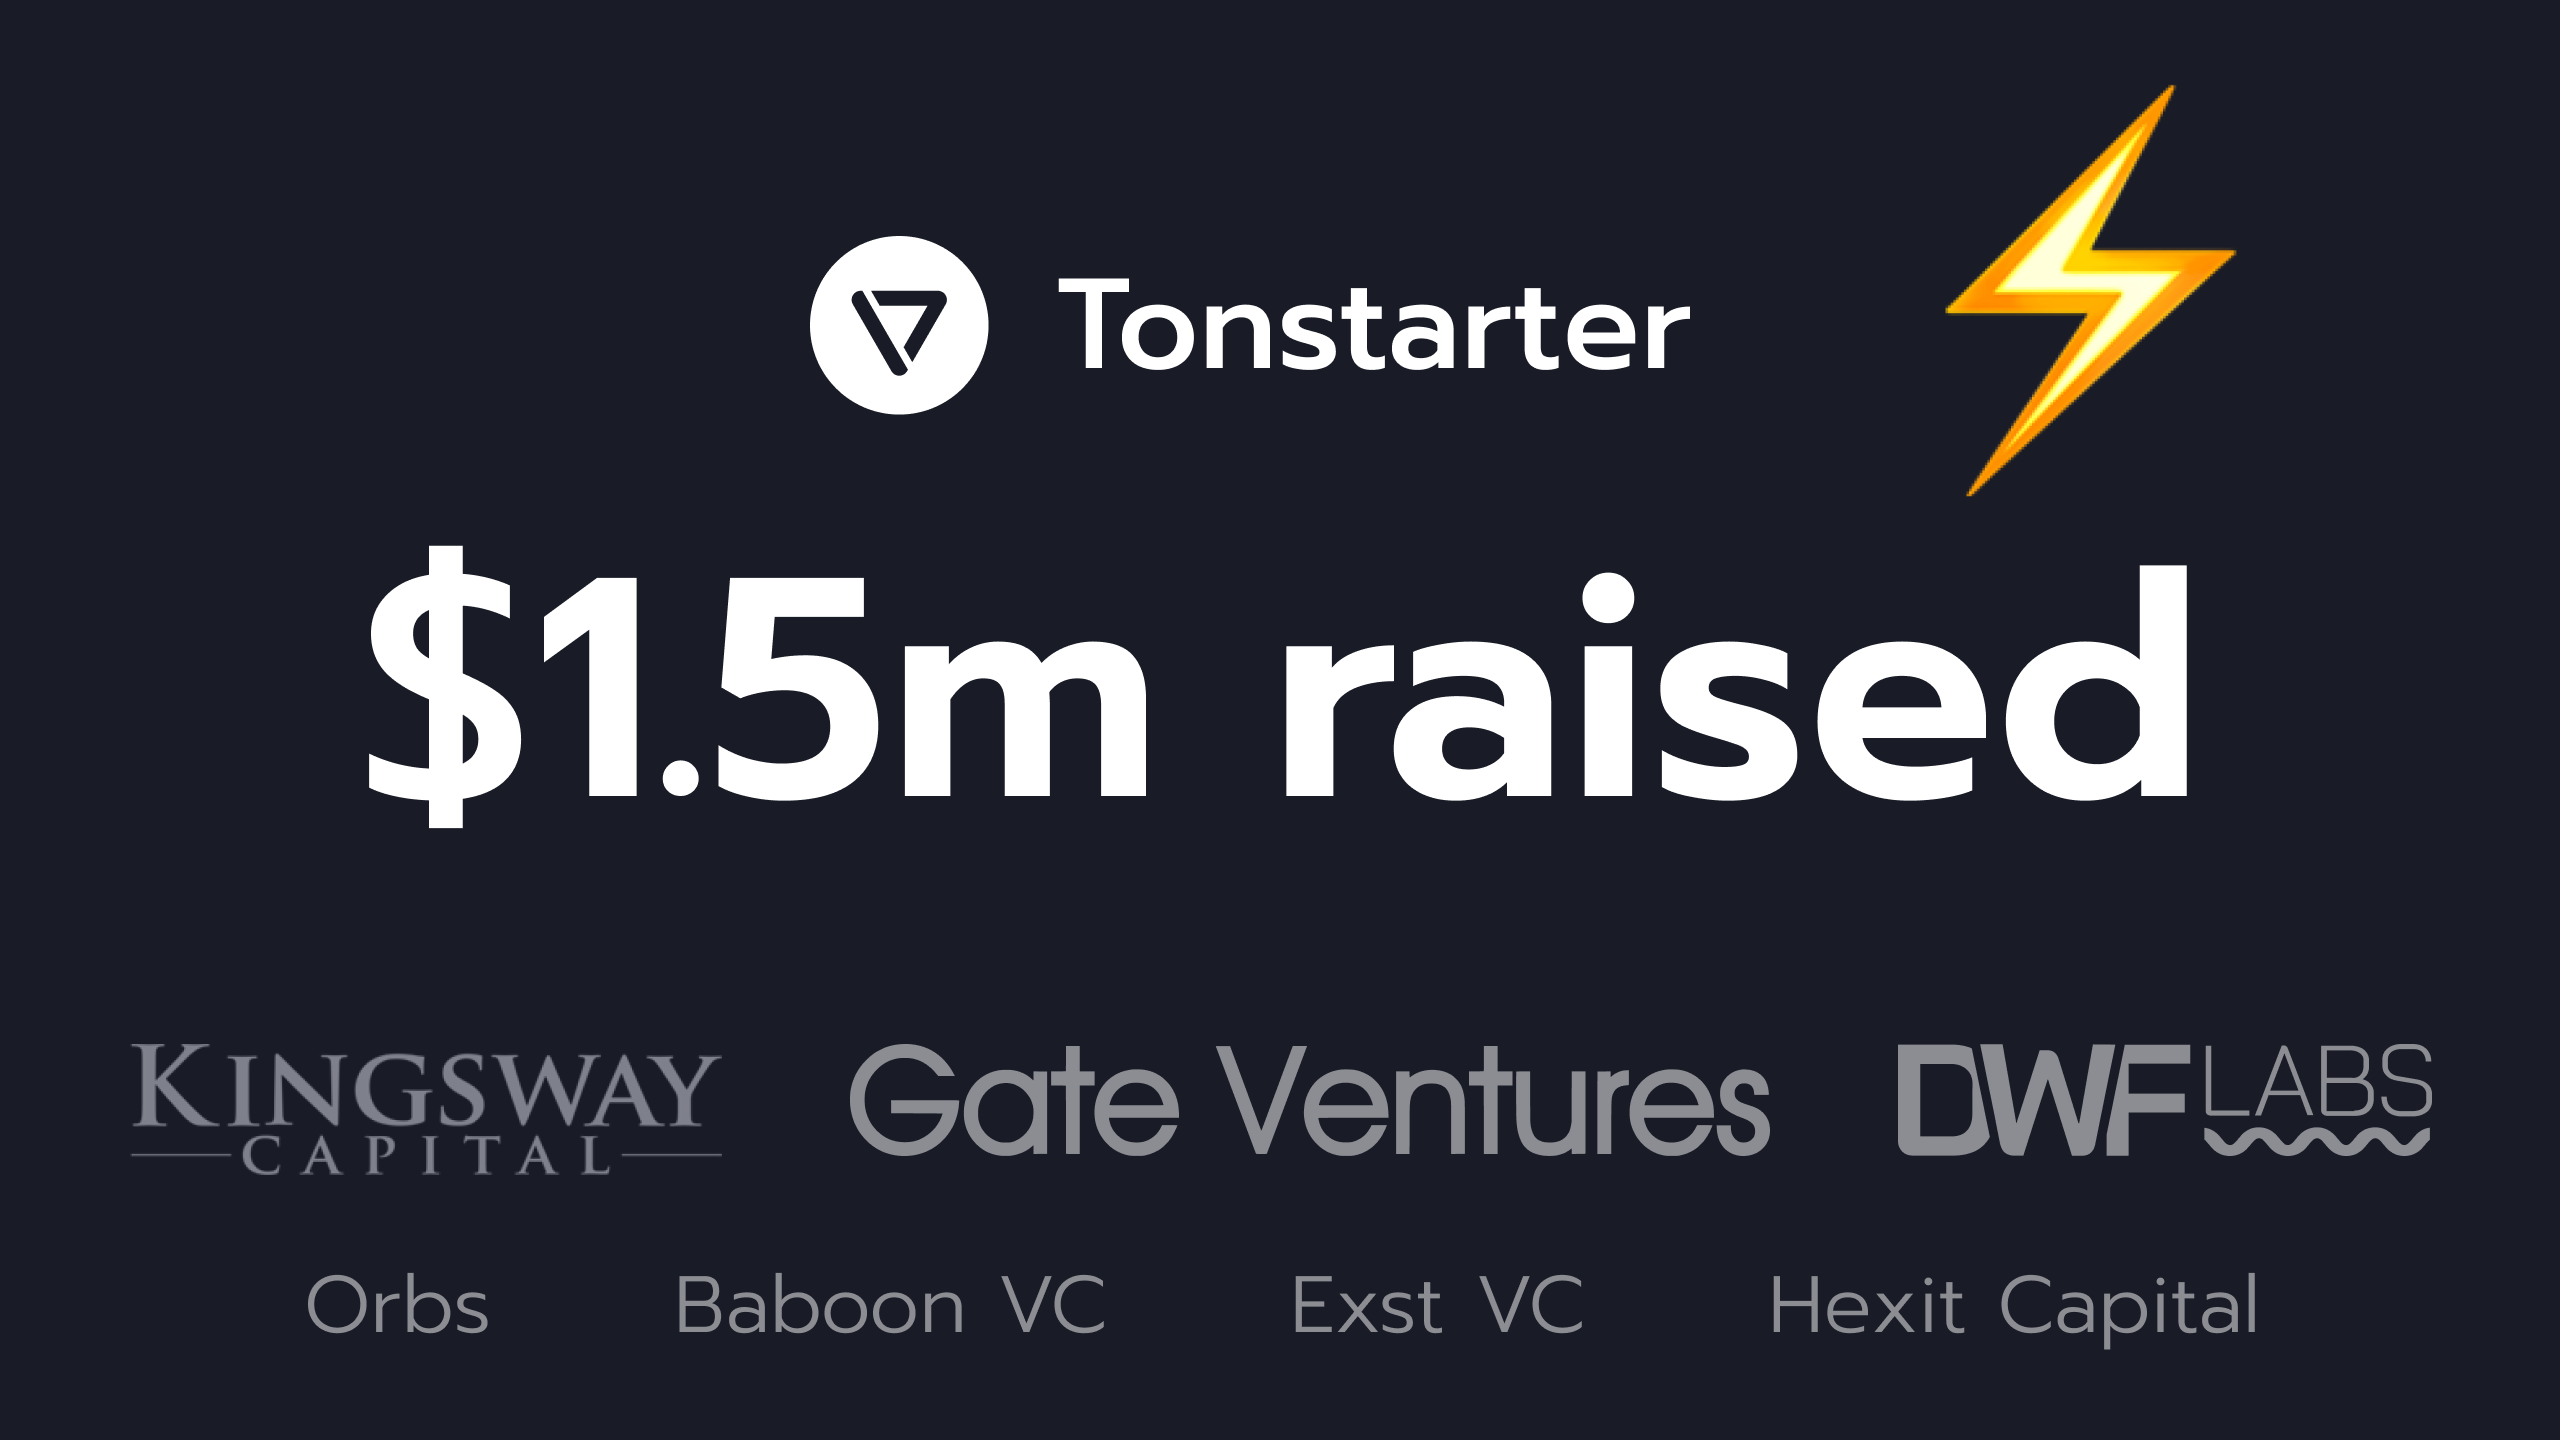 Tonstarter Closes $1.5 million Seed Round as Primary Fundraising Platform for The Open Network (TON)